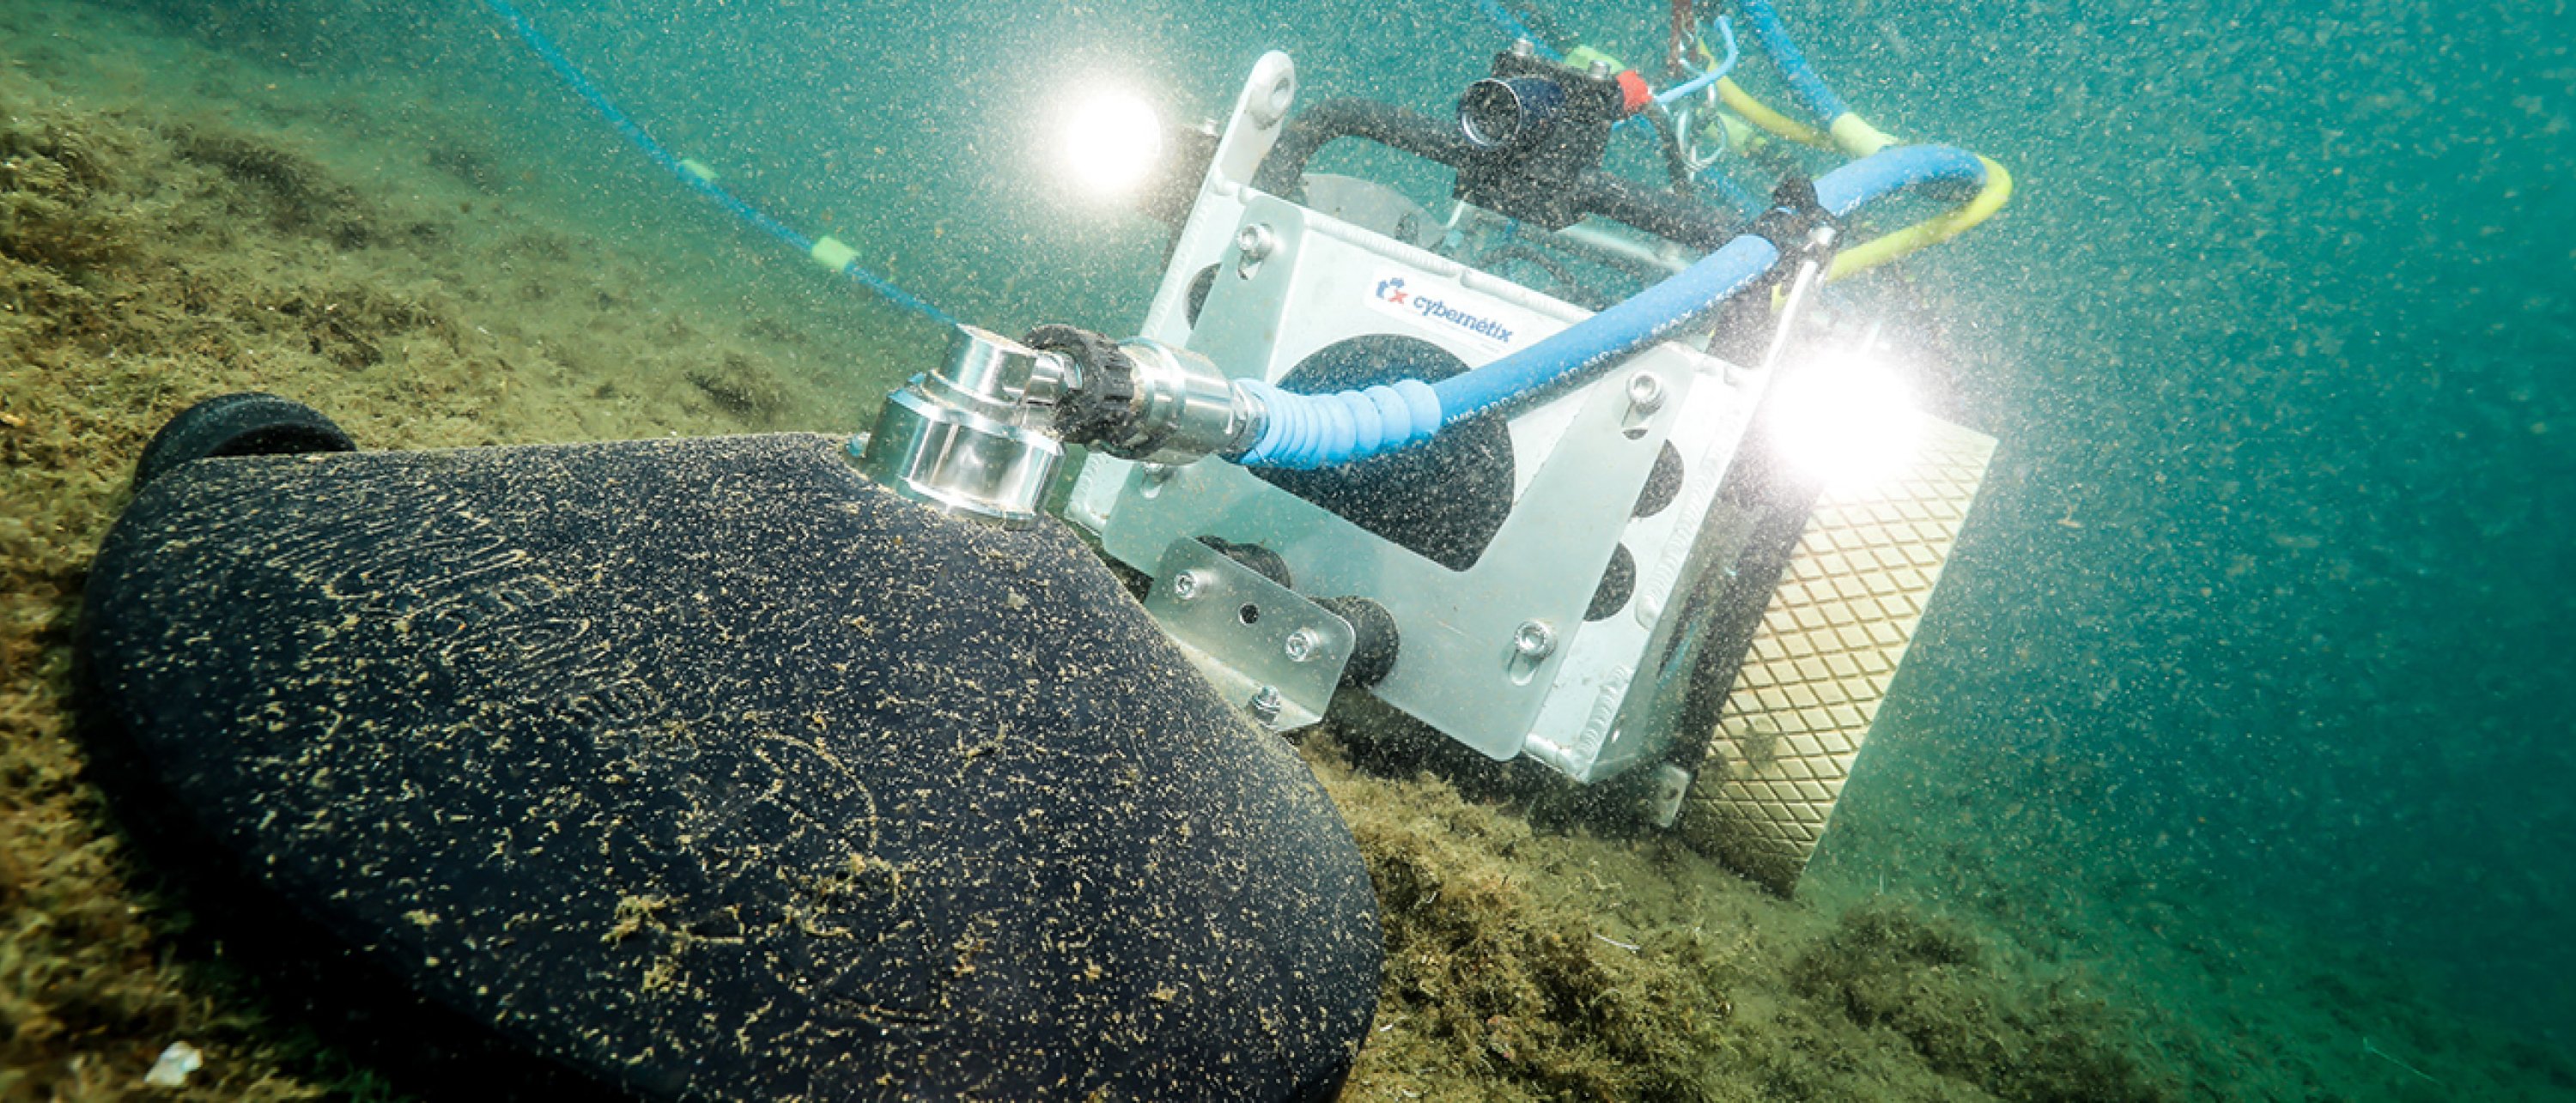 hull inspection and cleaning robotics